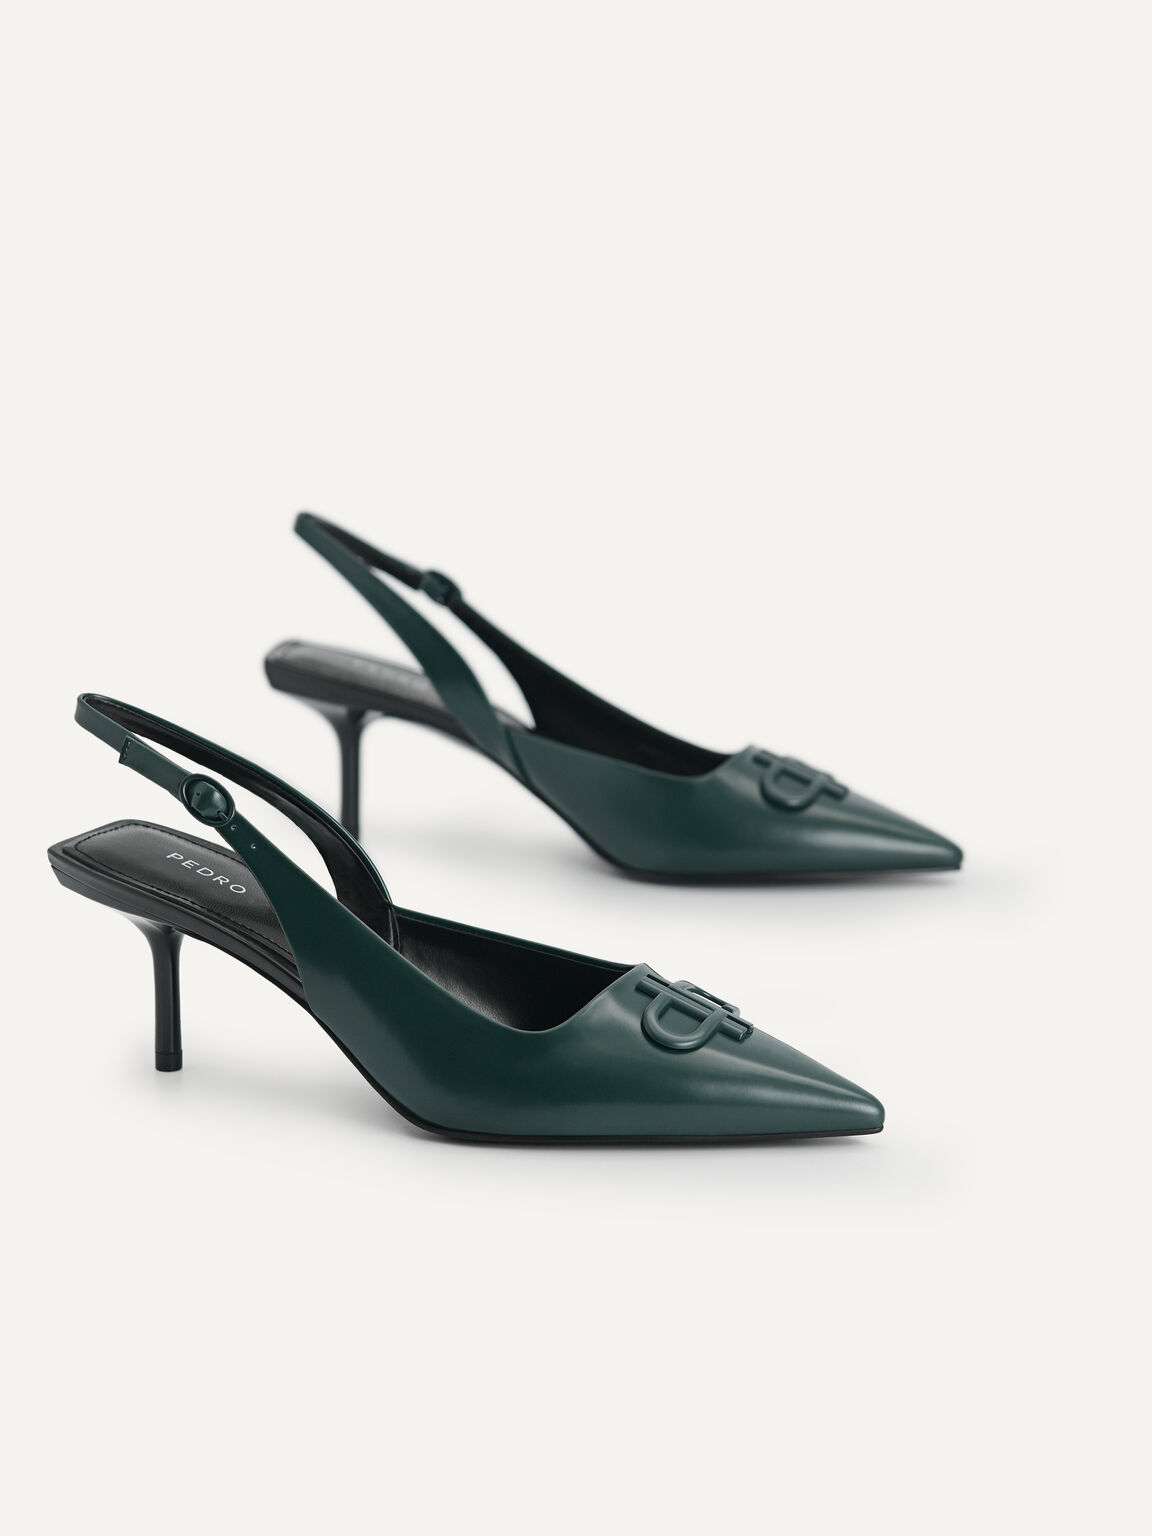 Icon Leather Pointed Toe Slingback Heels, Dark Green, hi-res